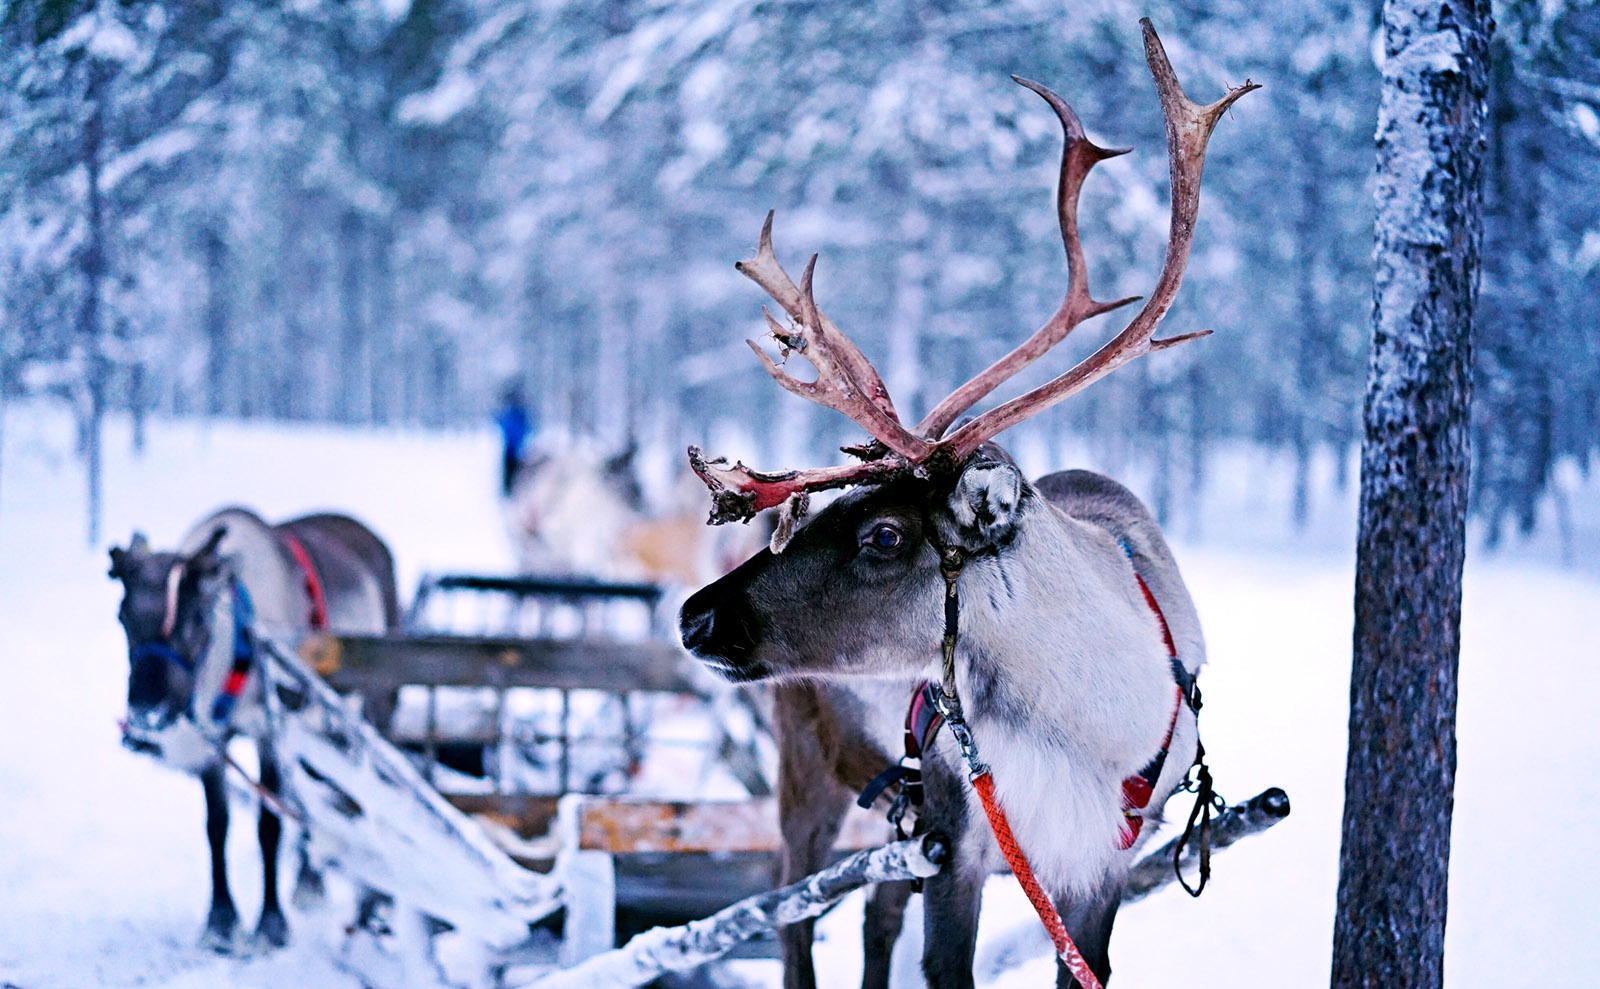 Finnish Reindeer, US-vs-UK Covers, a New Phryne Fisher & More: Endnotes 18 December